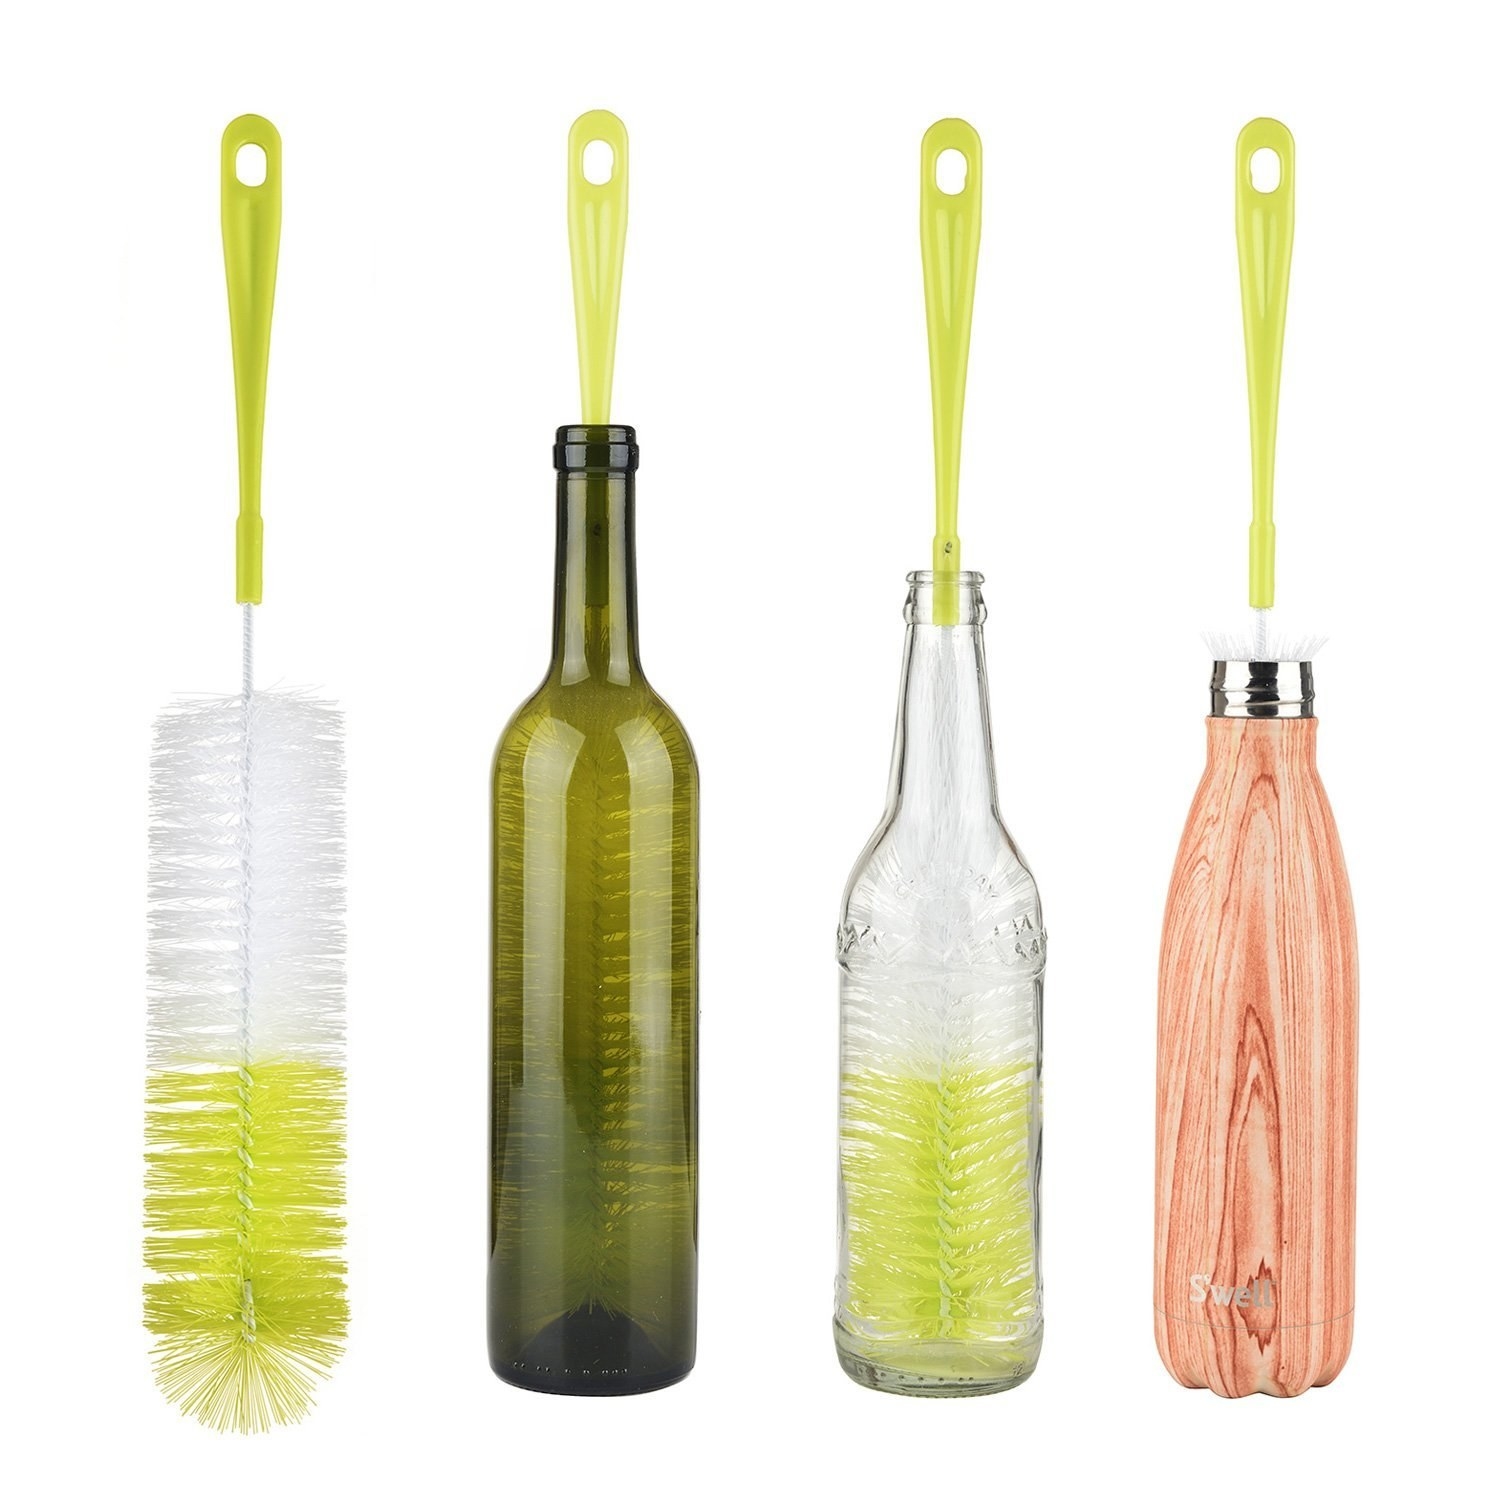 the long narrow brush fitting into a wine bottle, larger bottle, and water bottle